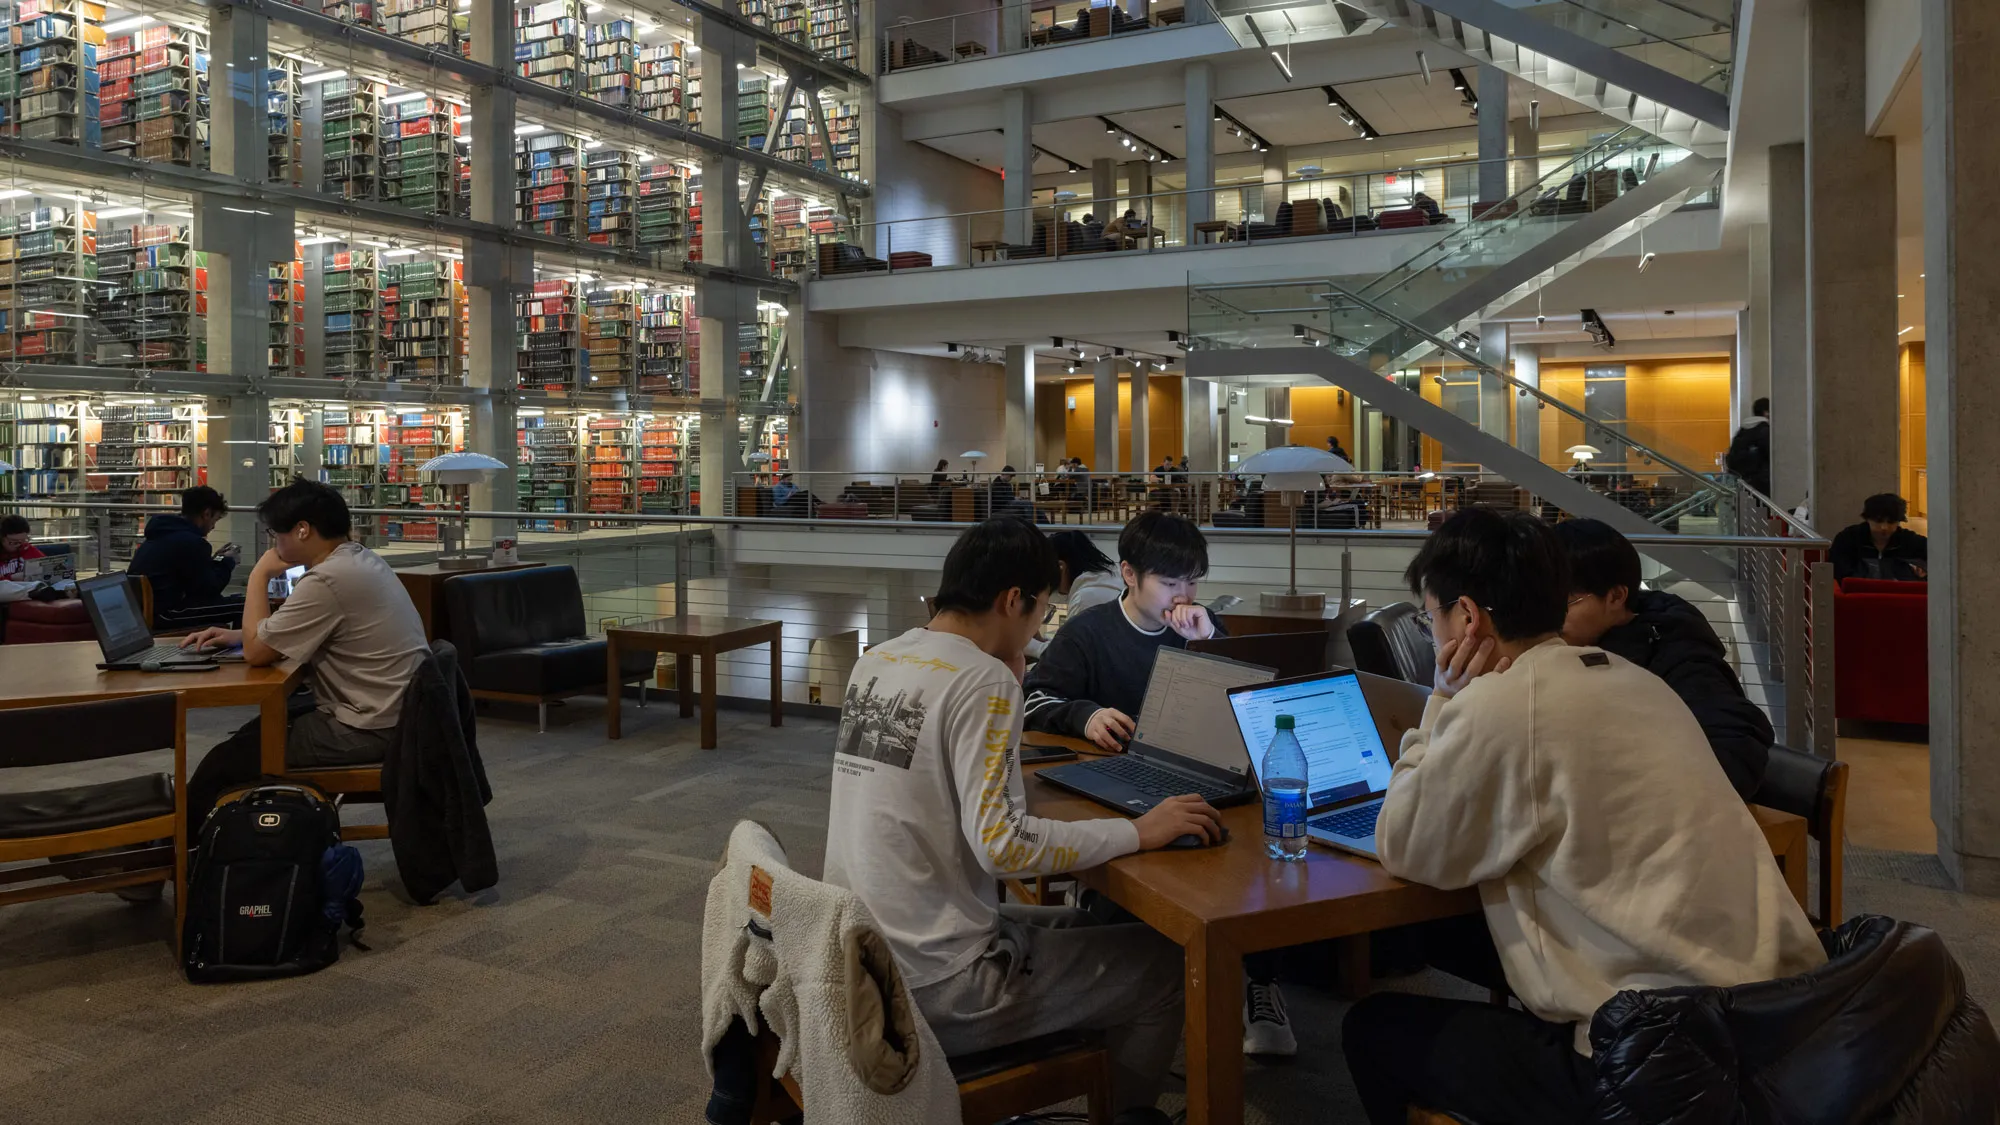 With the light inside the library dimmed because it’s dark outside (the library’s huge skylight provides much natural lighting), four young Asian men sit at a square table, each engrossed in his own laptop.  